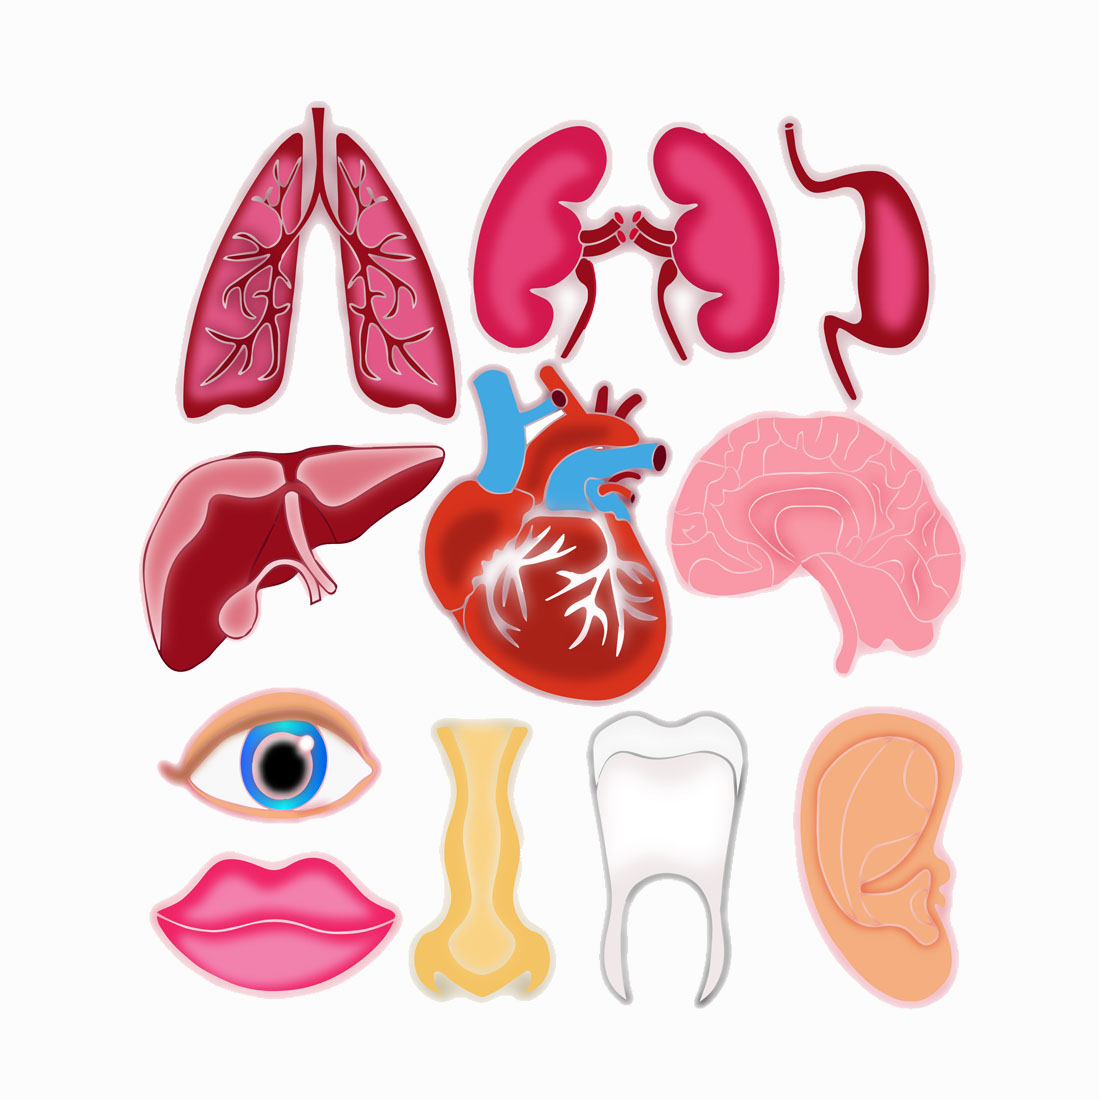 set of body organs preview image.